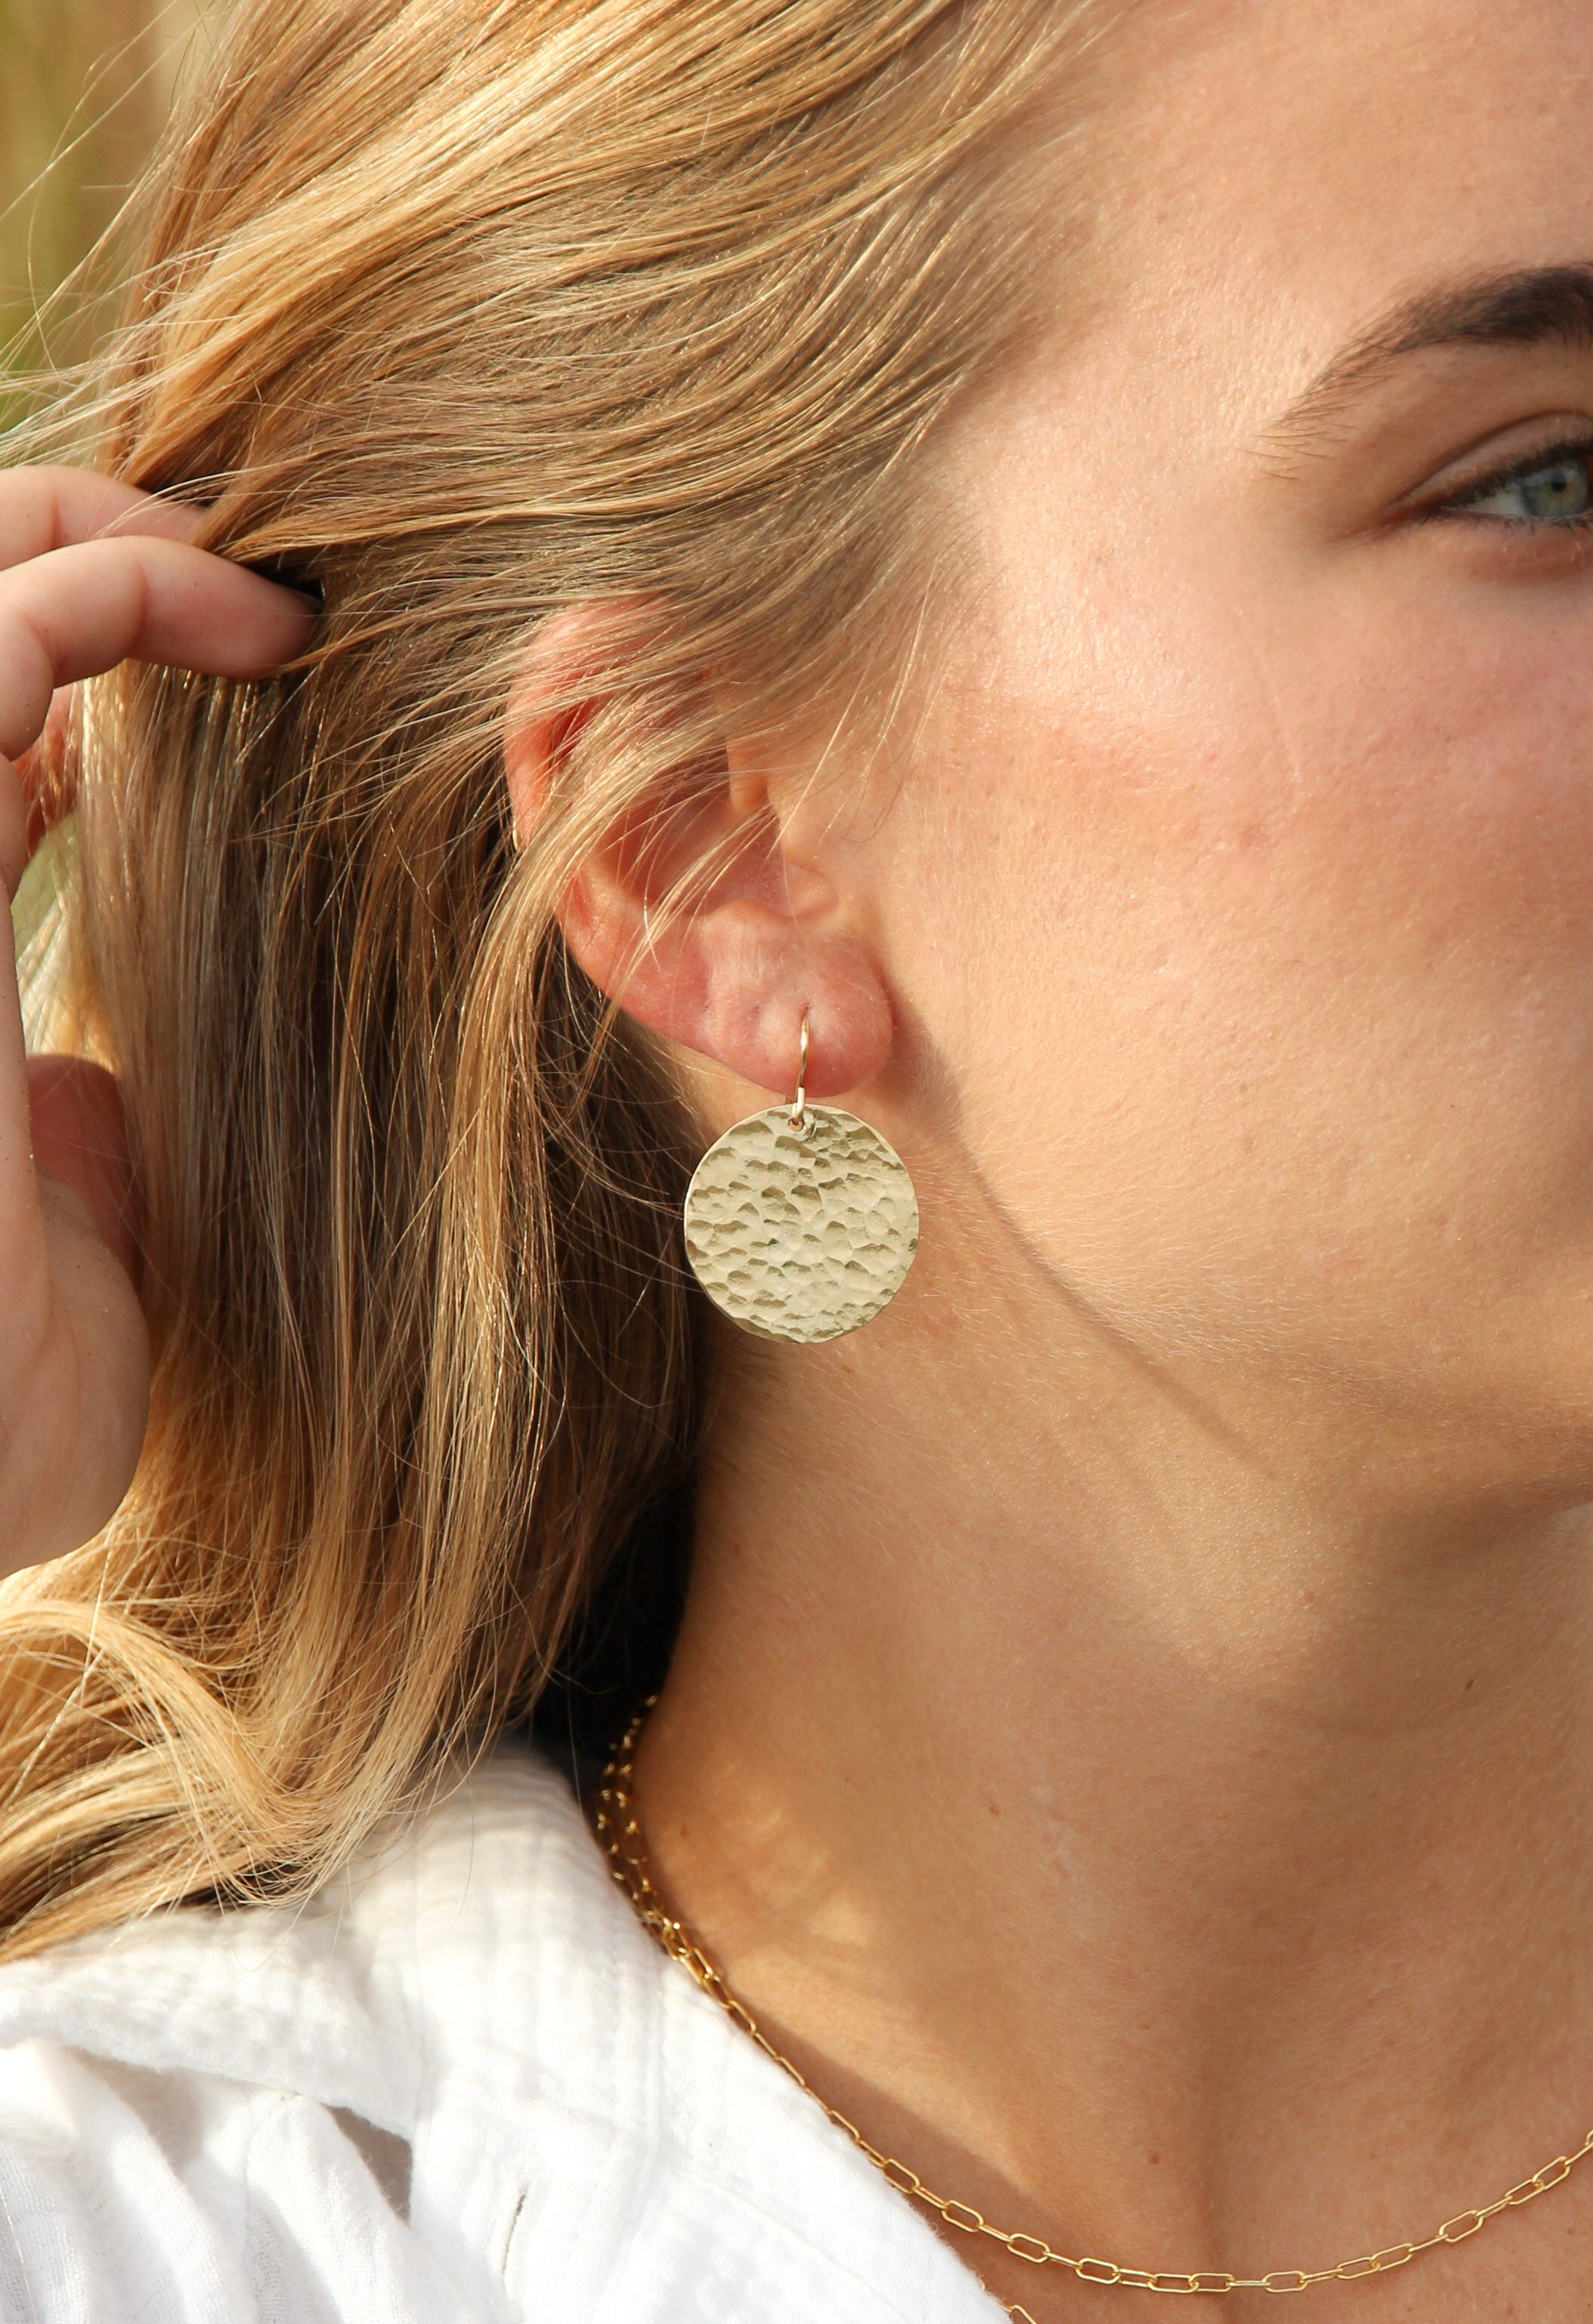 Gold filled hammered disk earrings shown in a woman's ears.